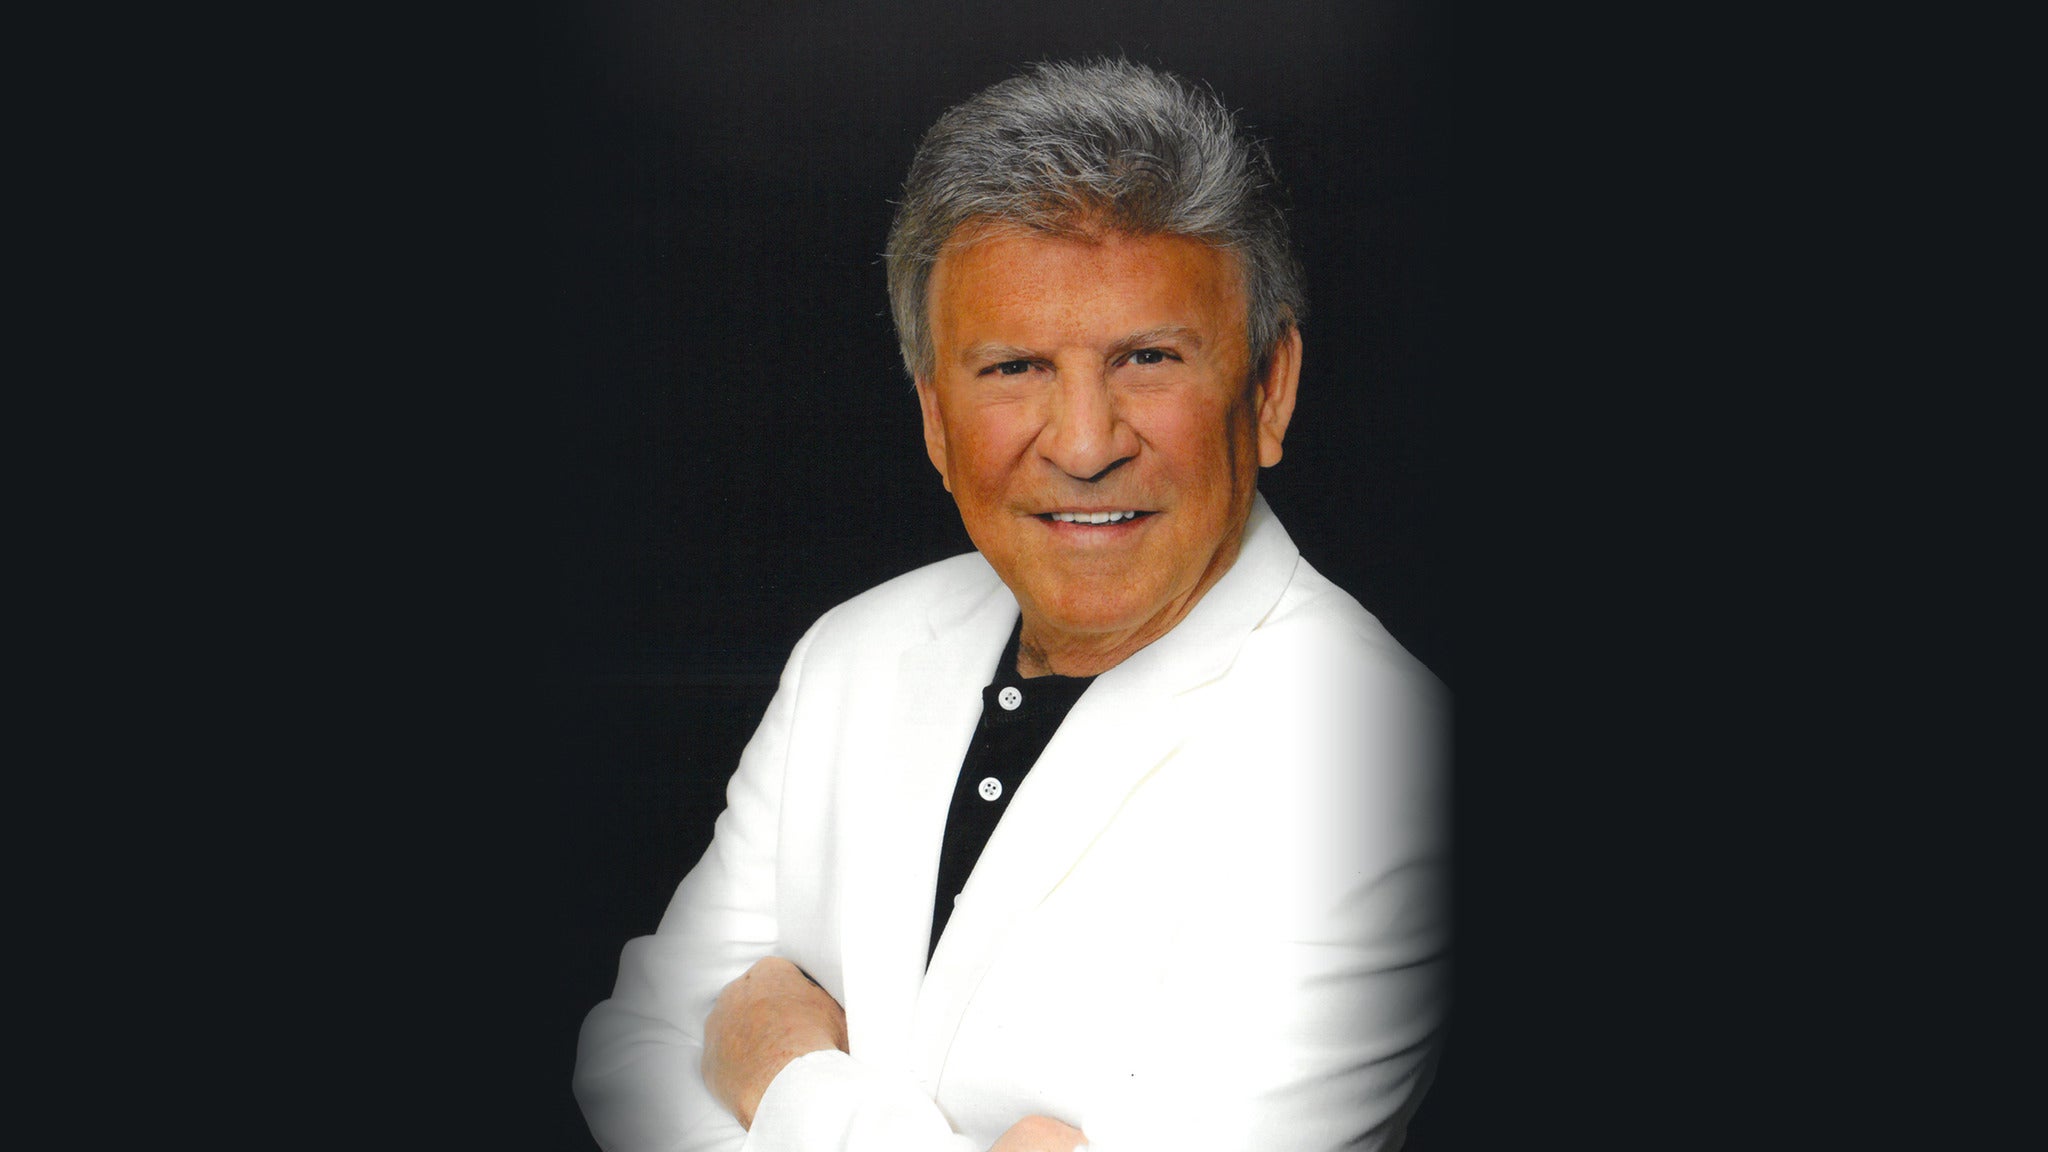 Bobby Rydell presale password for show tickets in Atlantic City, NJ (Golden Nugget)